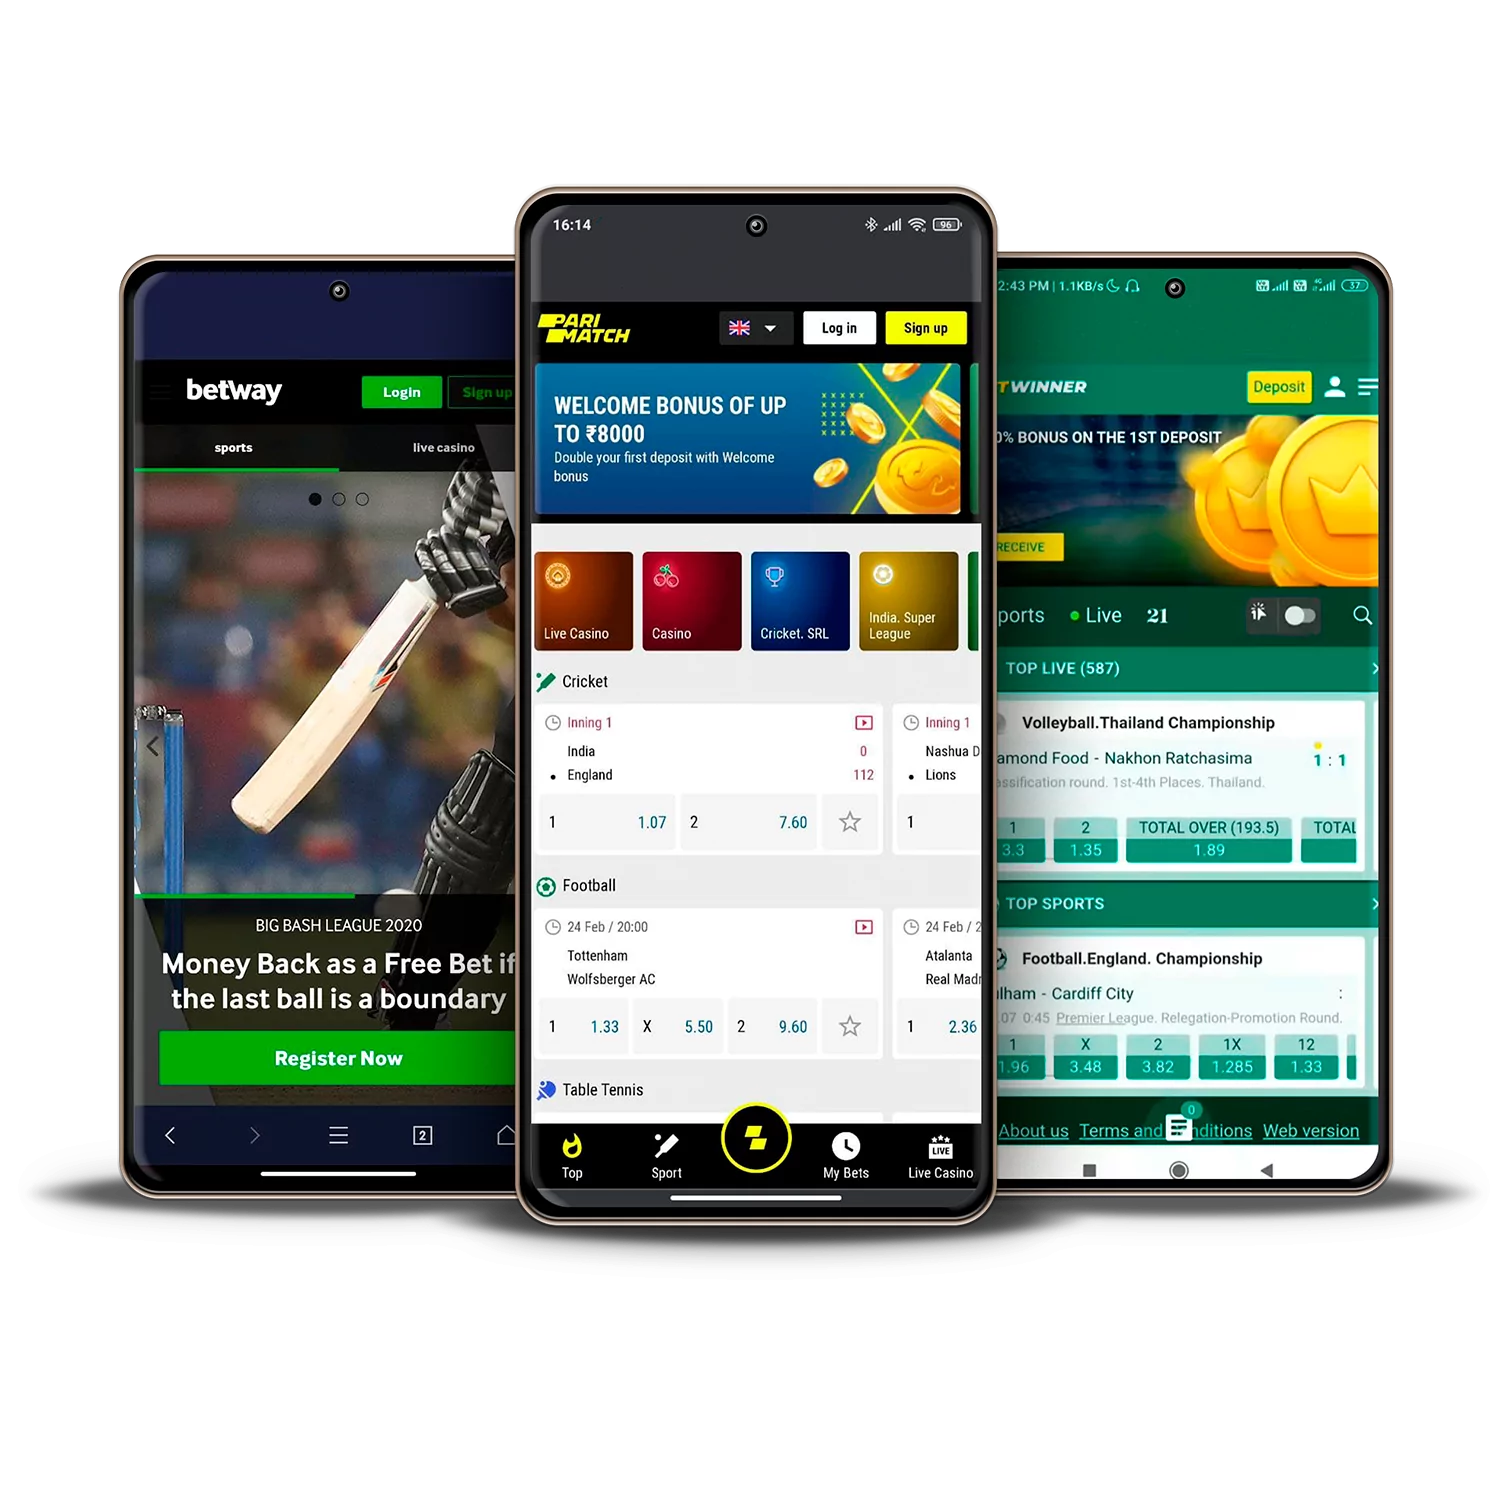 The Etiquette of indian cricket betting app download